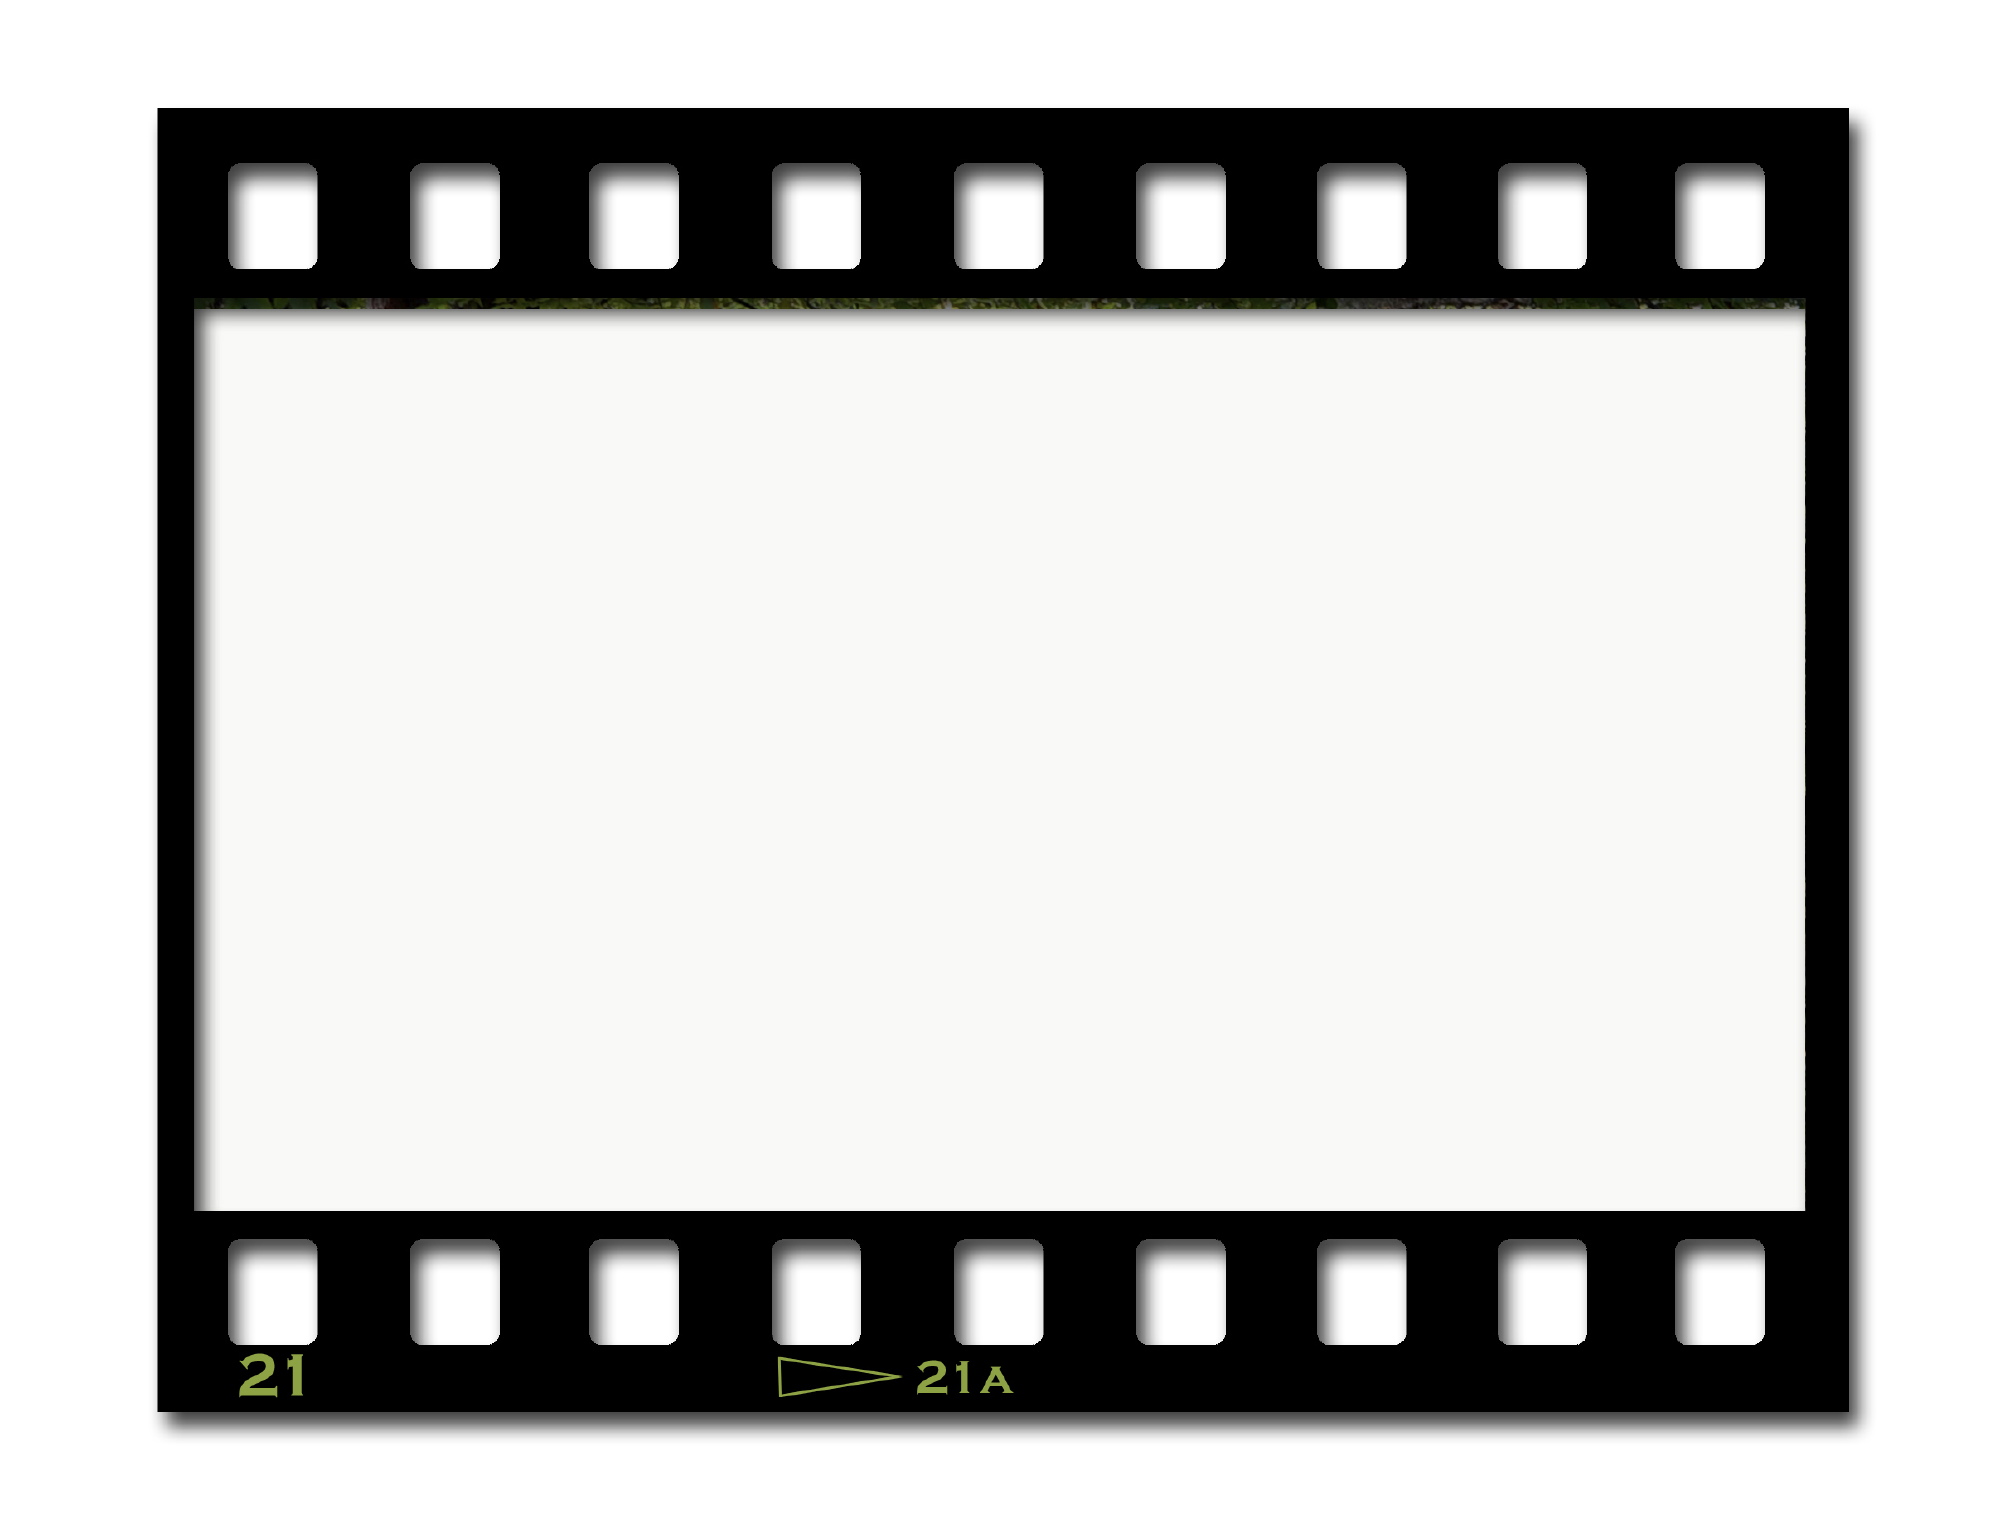 Film Strip Template Png - ClipArt Best